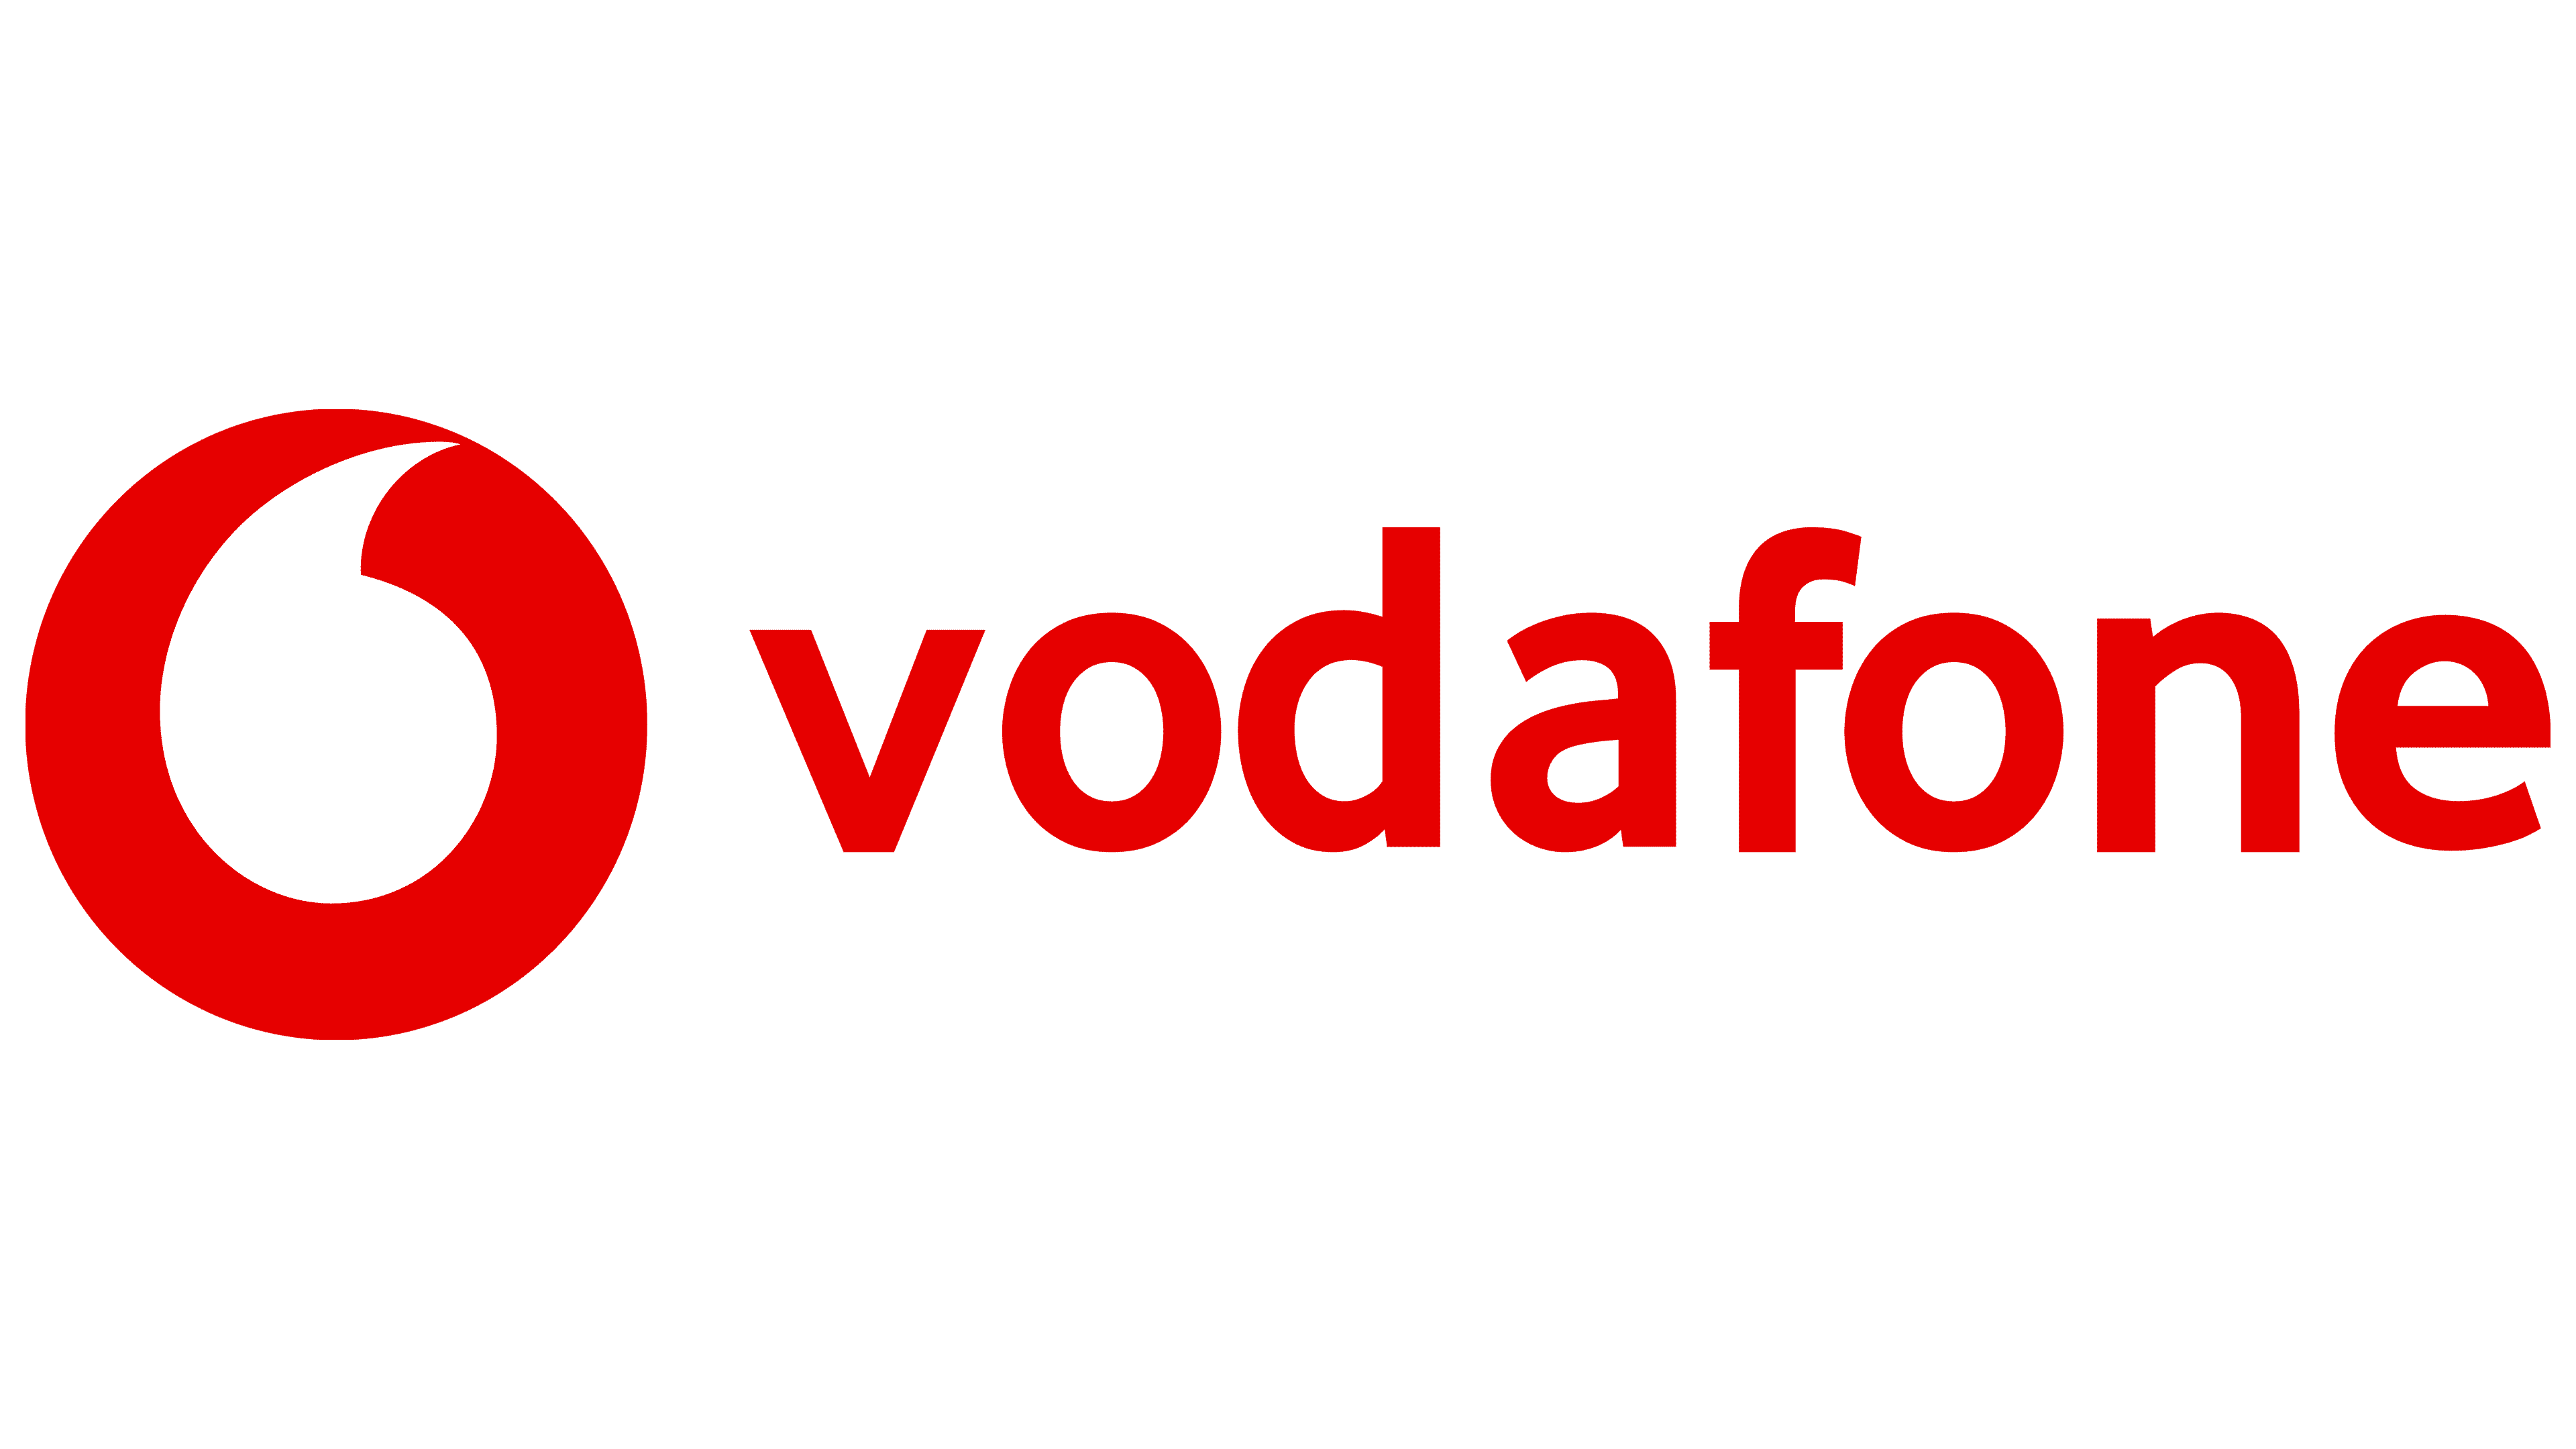 Vodafone - Design is the difference